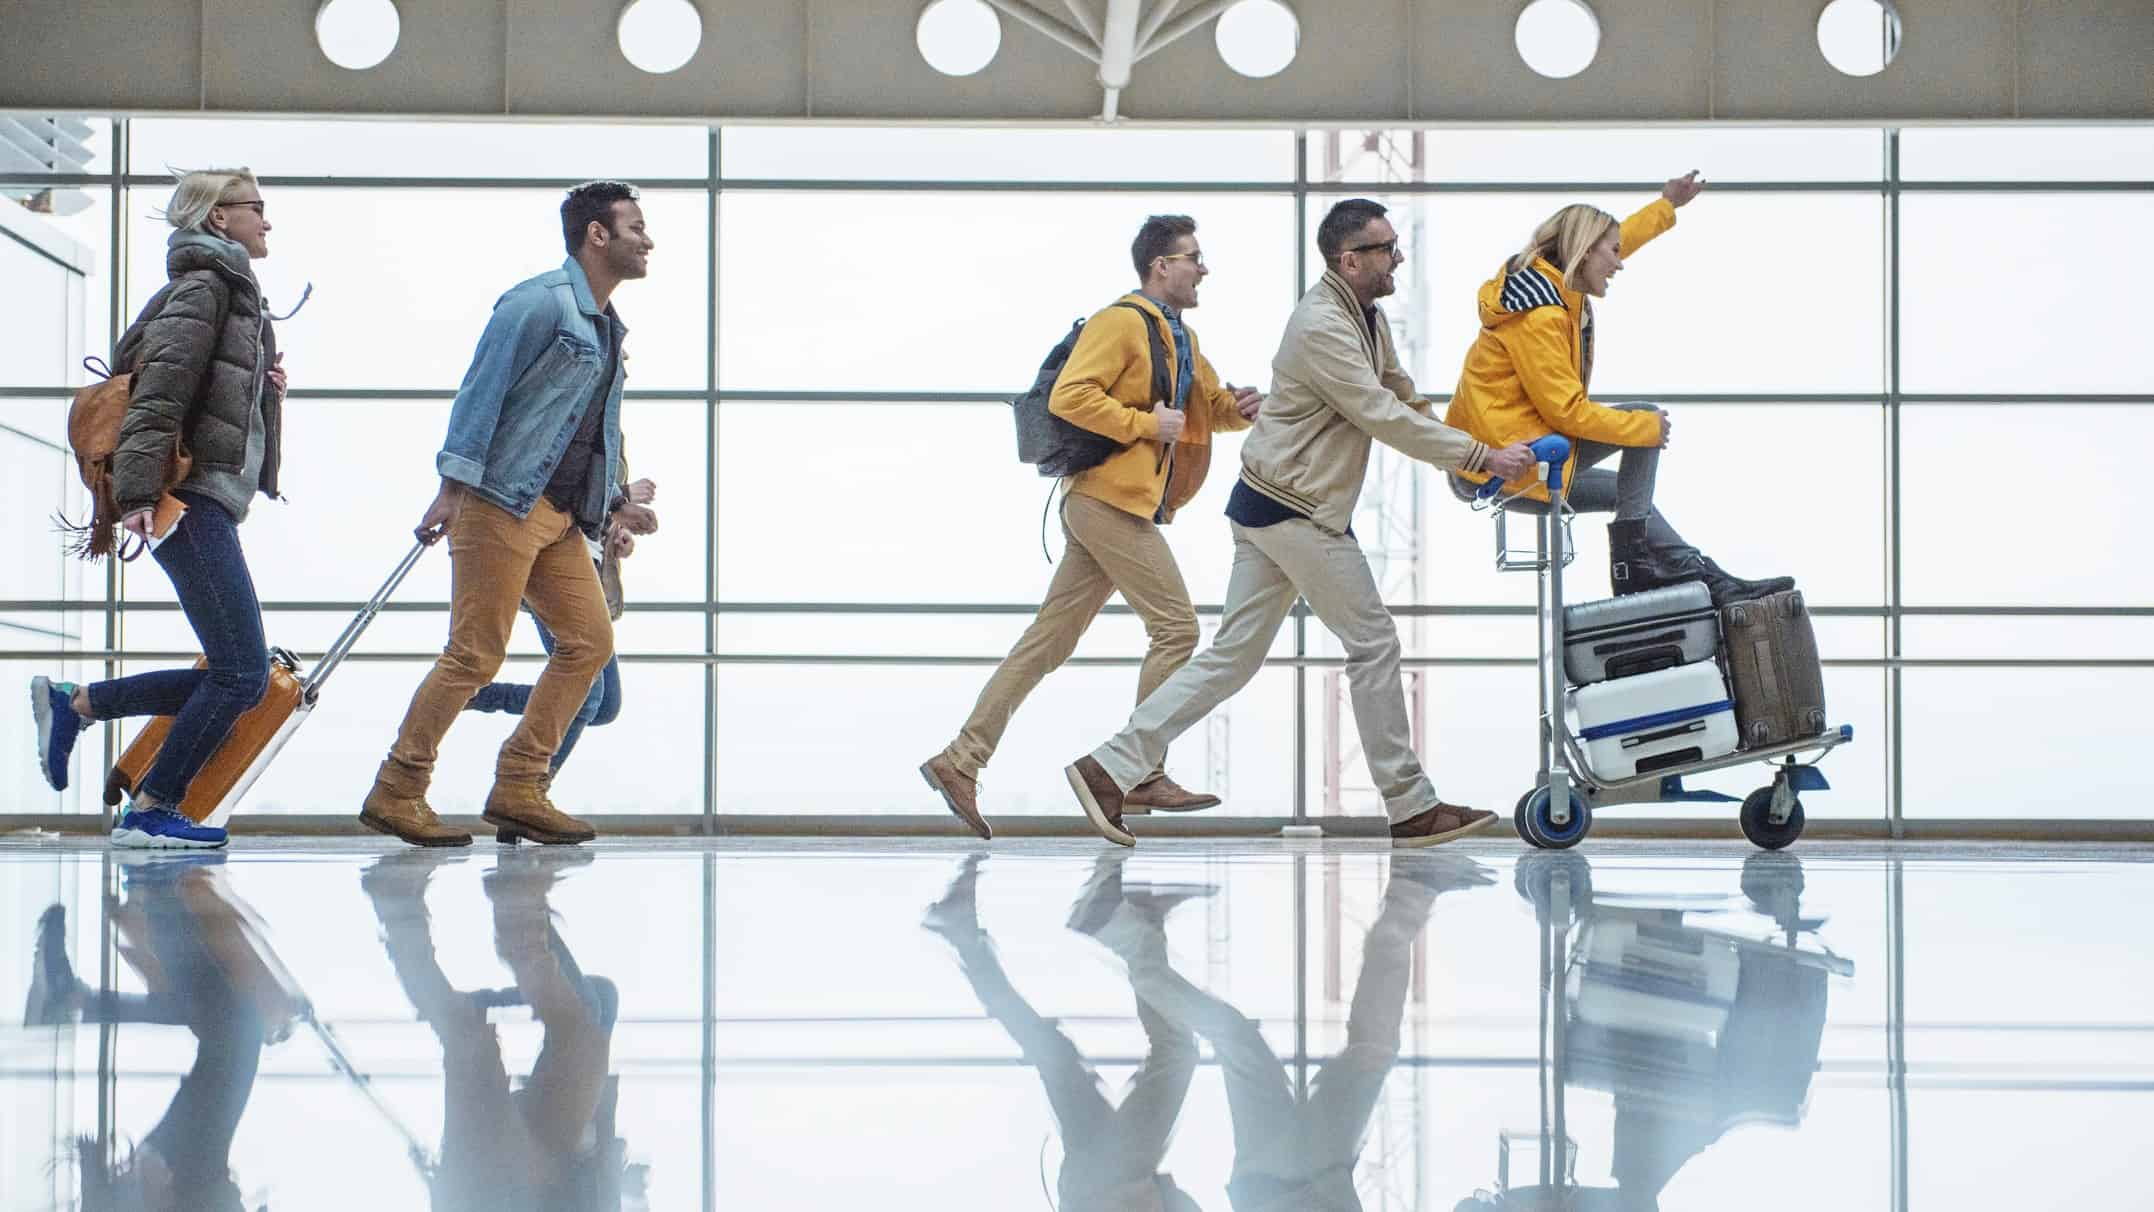 A group of travellers run excitedly to the airport gate.